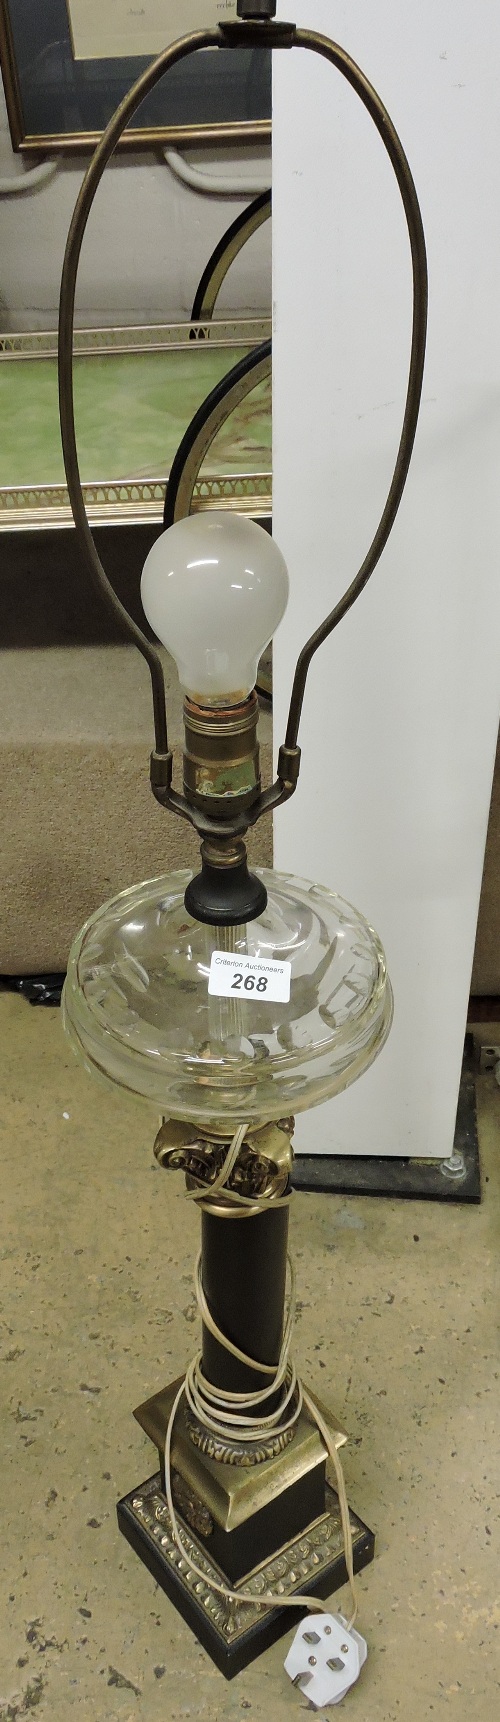 A 19th Century Corinthian column table lamp with glass reservoir - Image 2 of 2